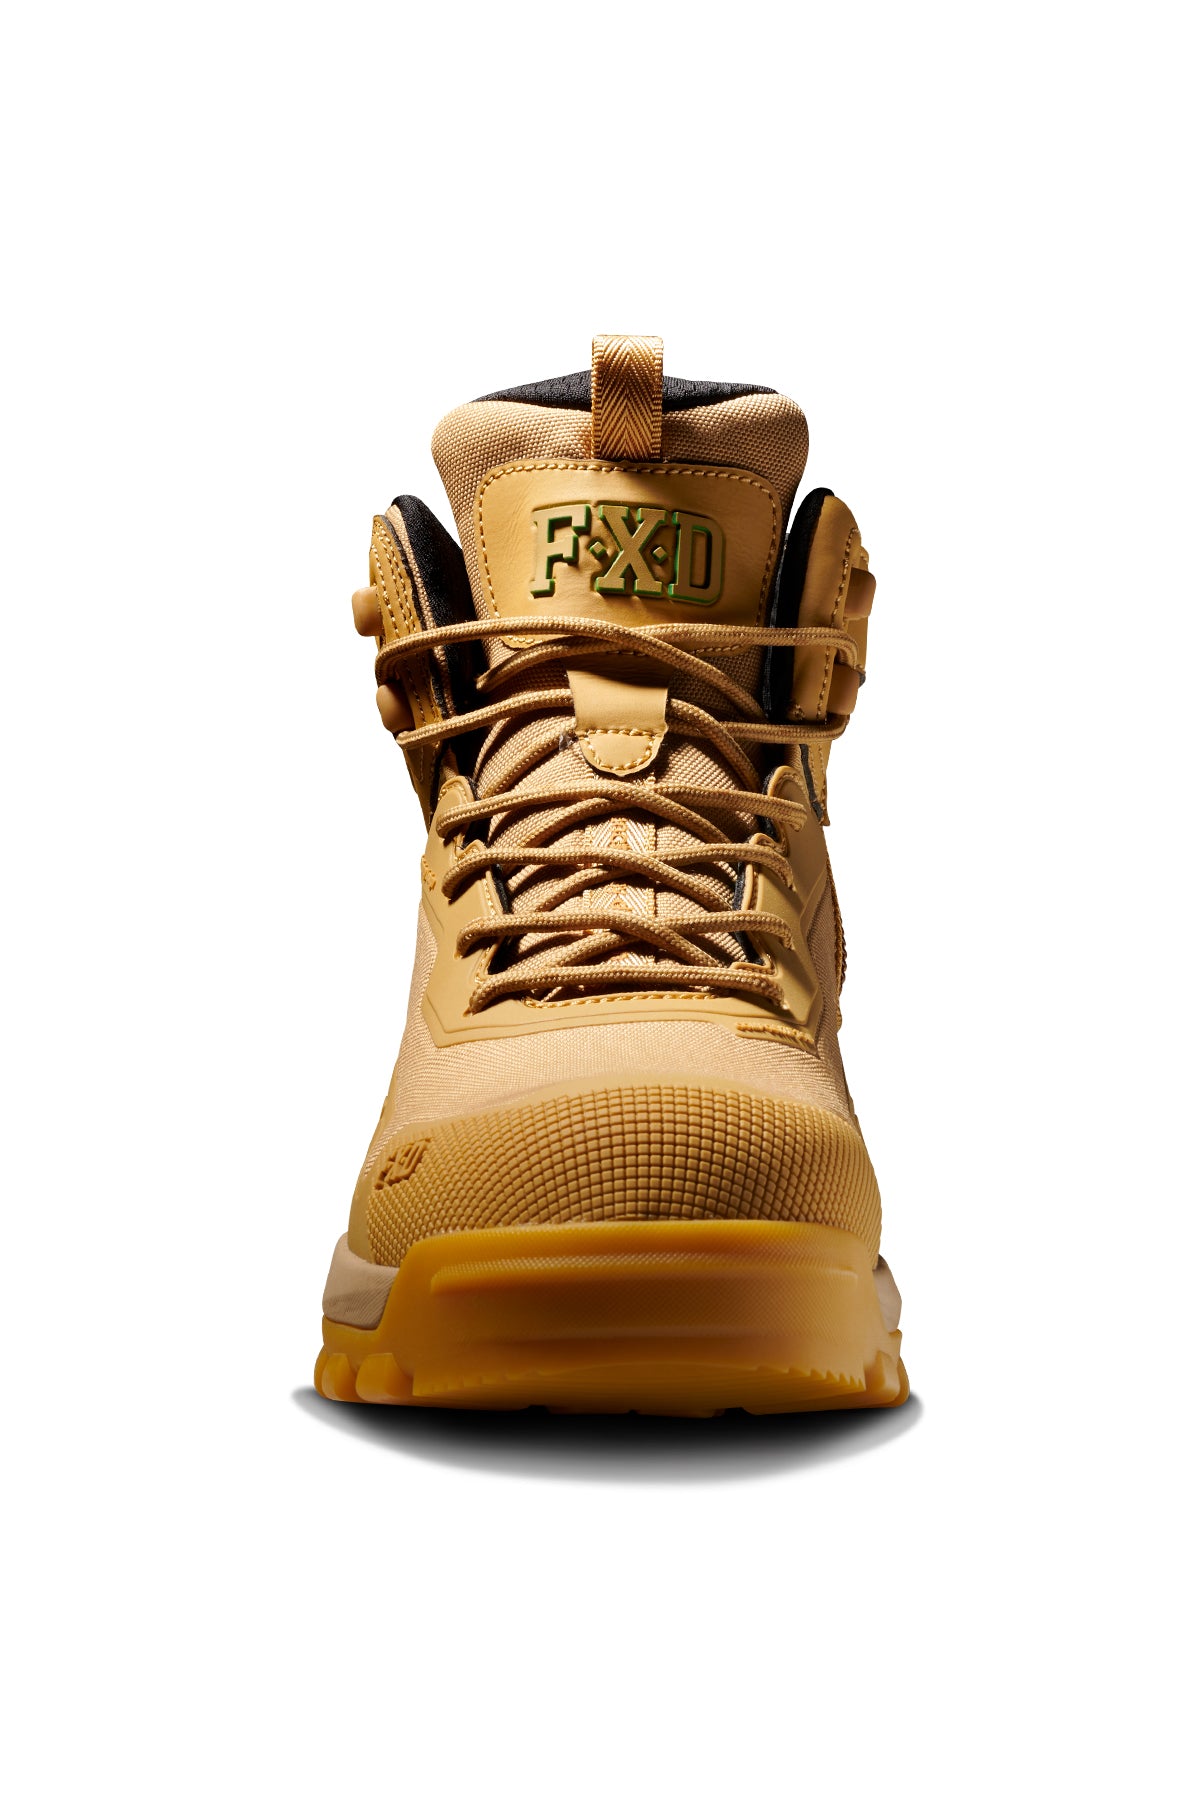 FXD - WB6 Mid Cut Work Boot (Wheat)